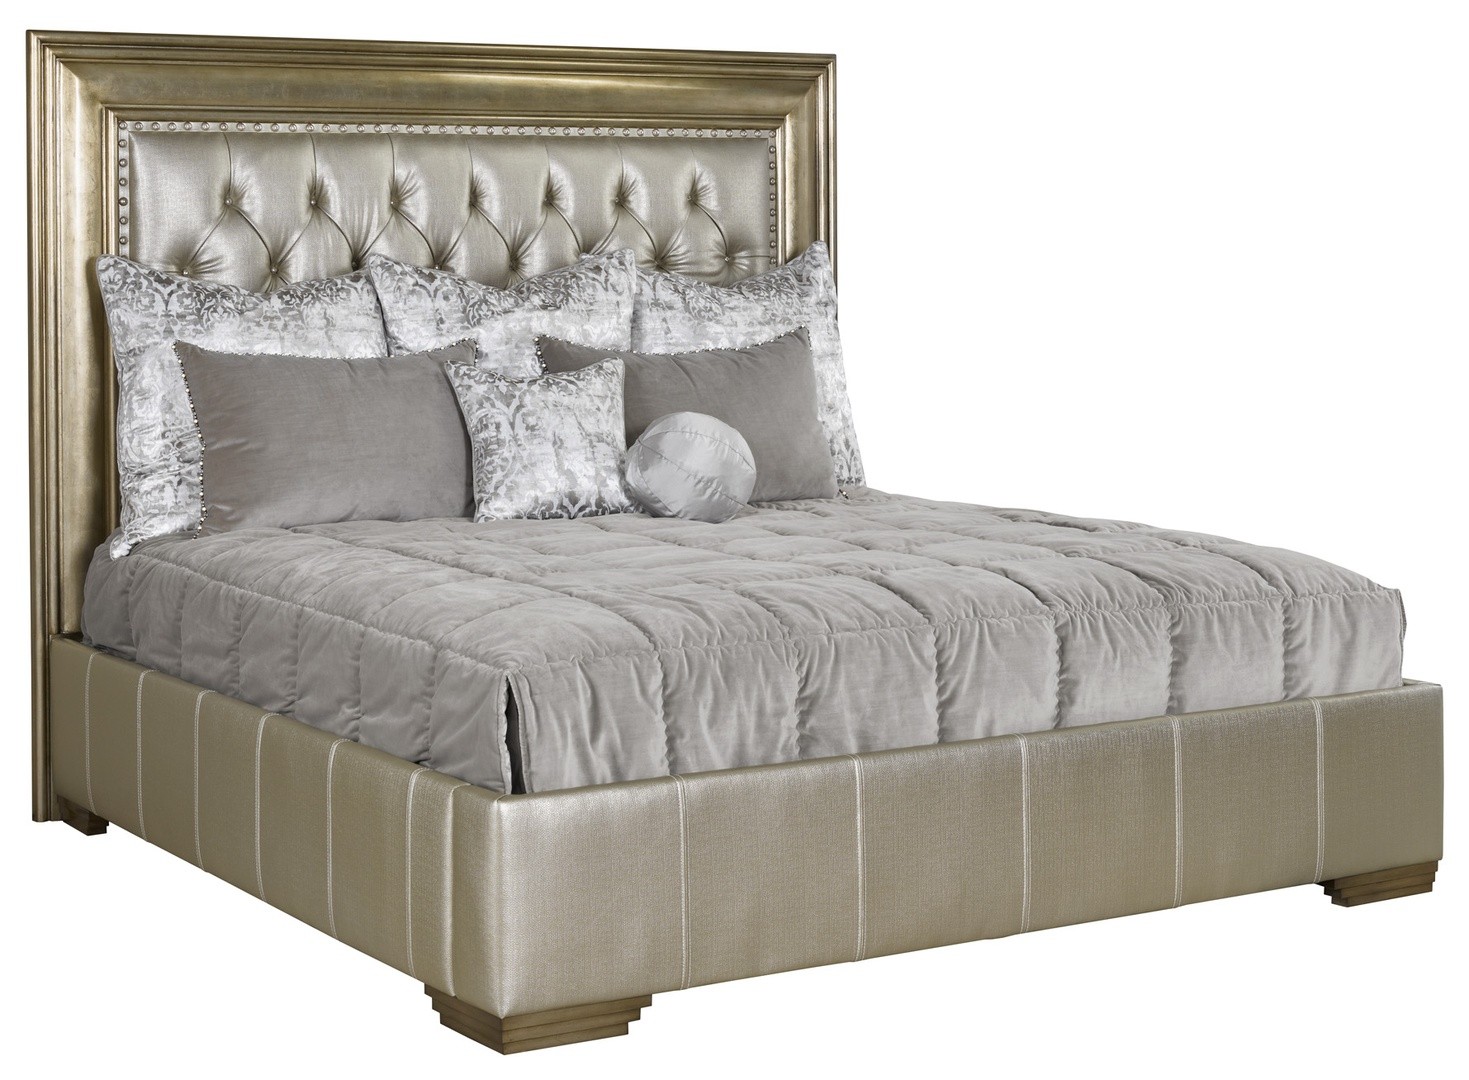 BEDS - Queen, King & California King Sizes Bed with quilted platinum headboard with distressed wooden detailing